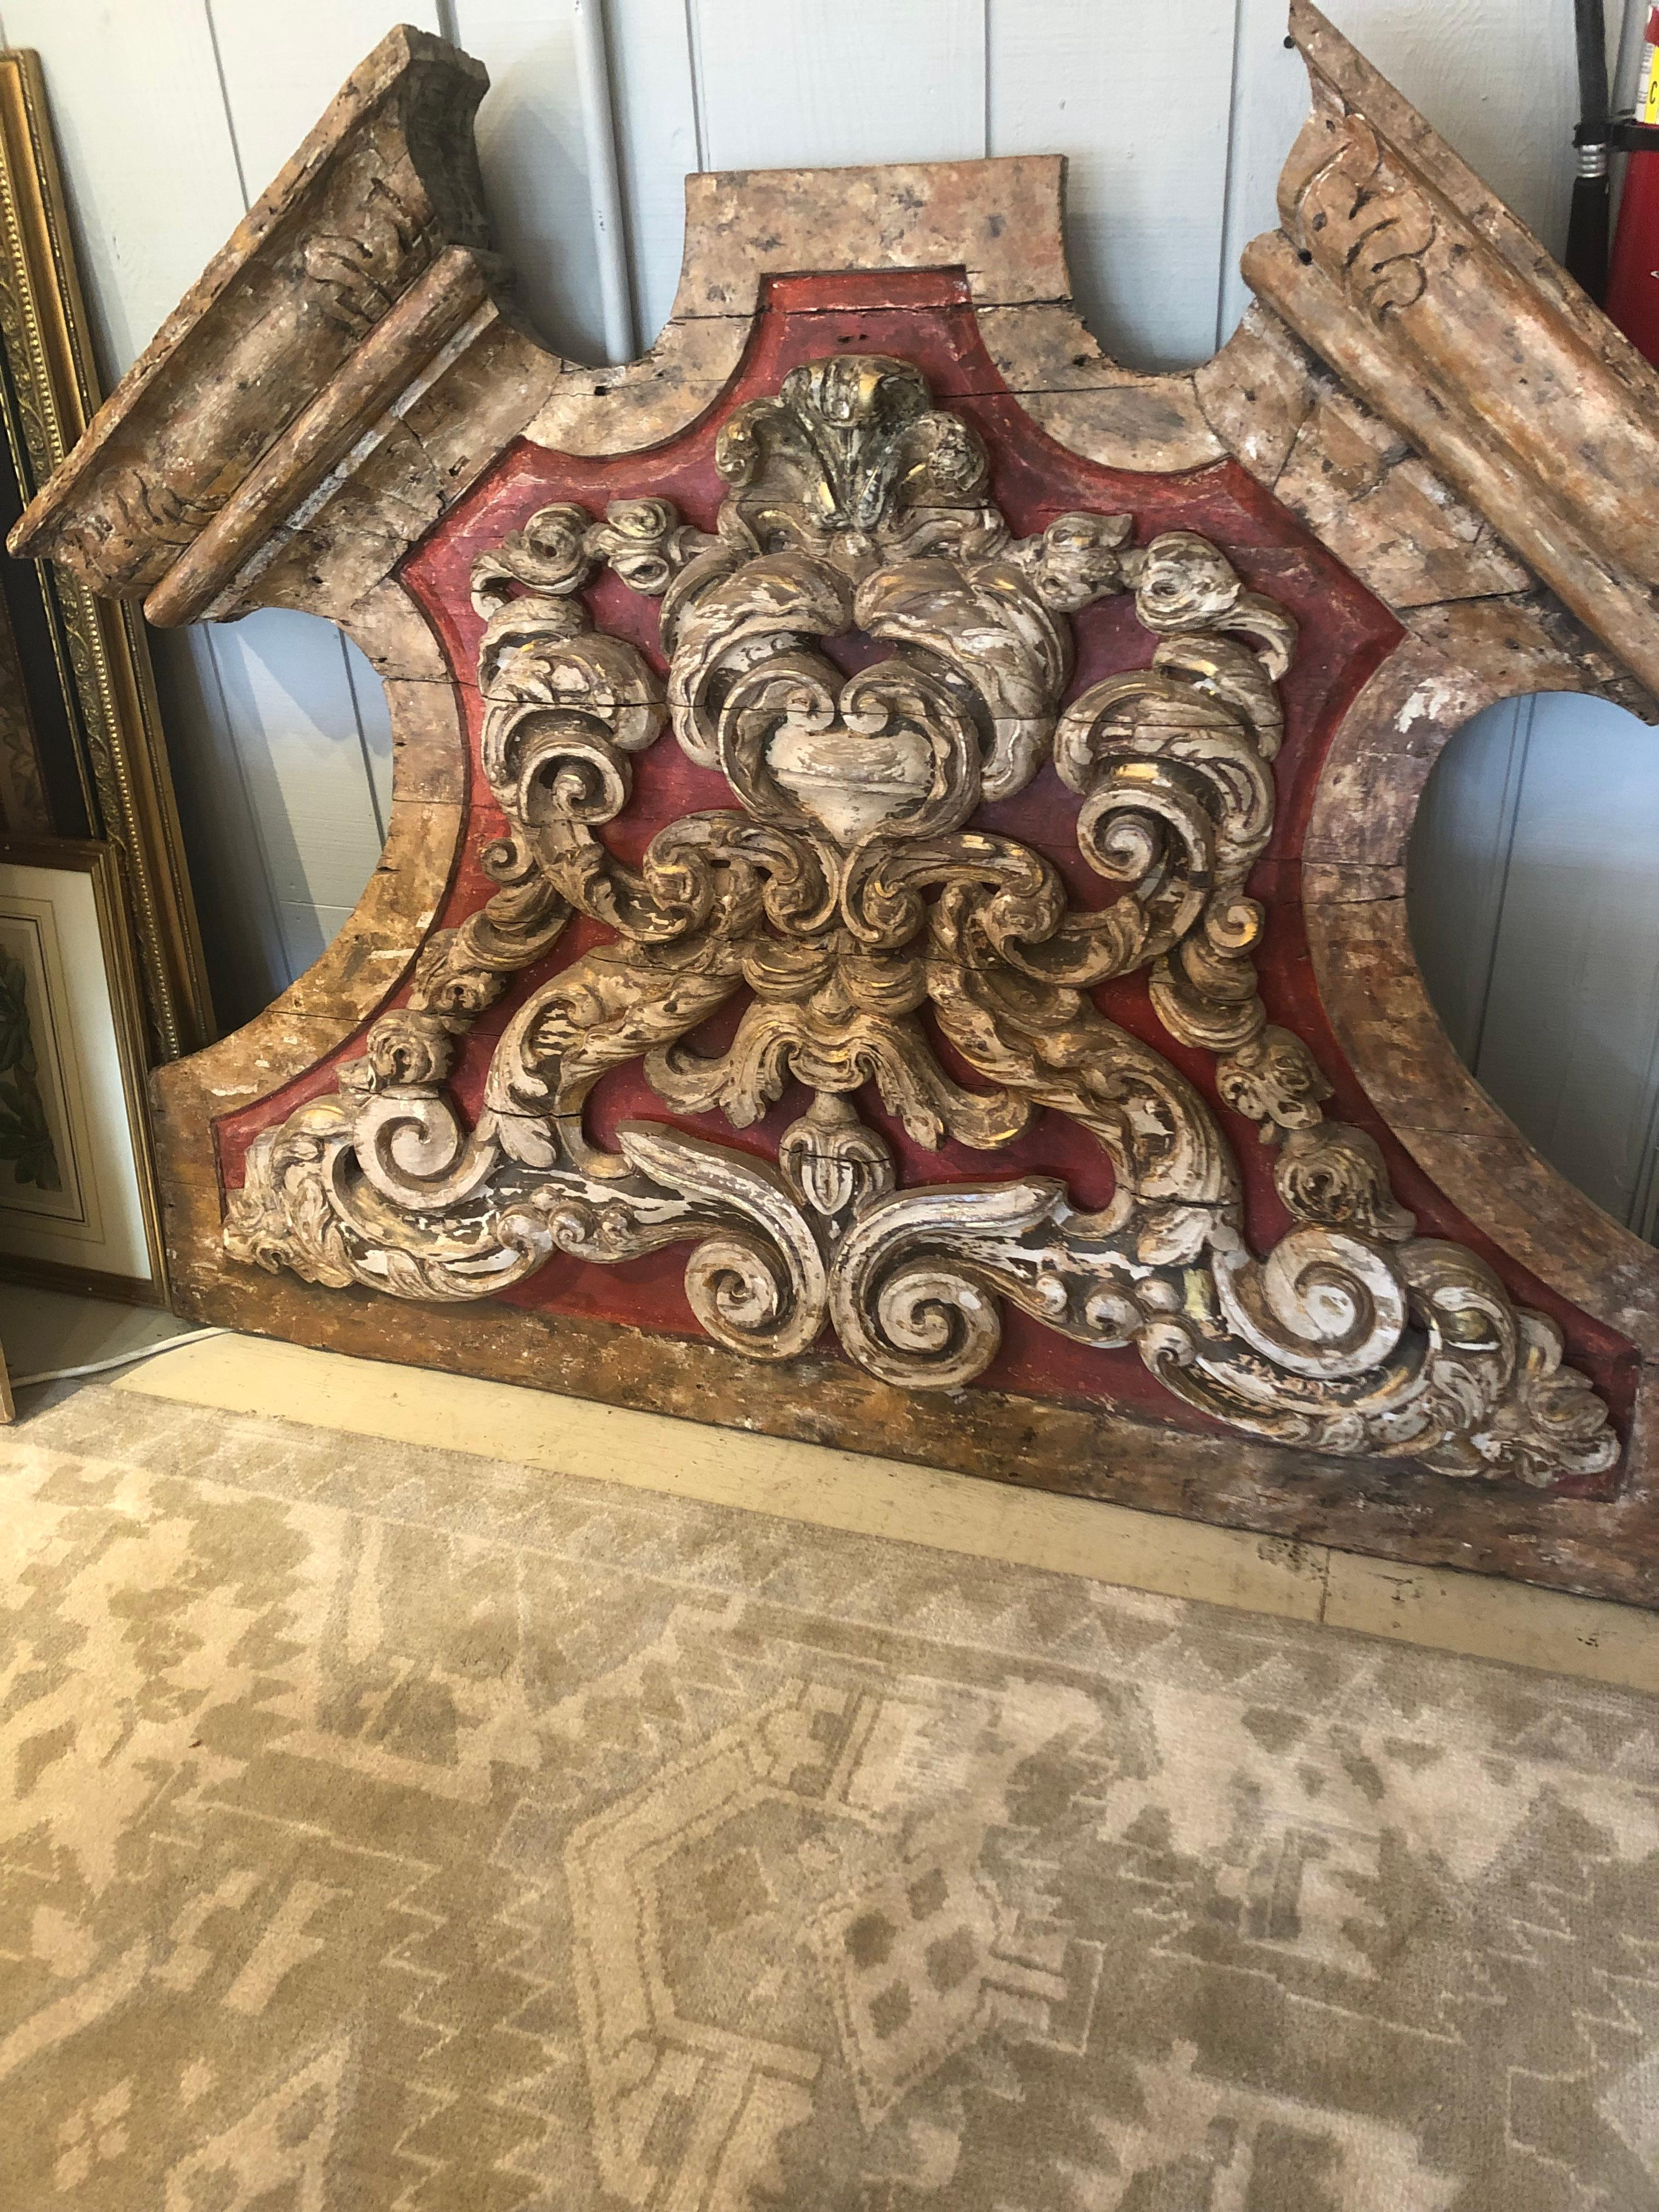 A strikingly large and ornate fantastic 19th century one of a kind architectural fragment from a French monastery having red painted weathered background and sculptural 3 dimensional raised carved wood decoration. Makes a monumental statement in